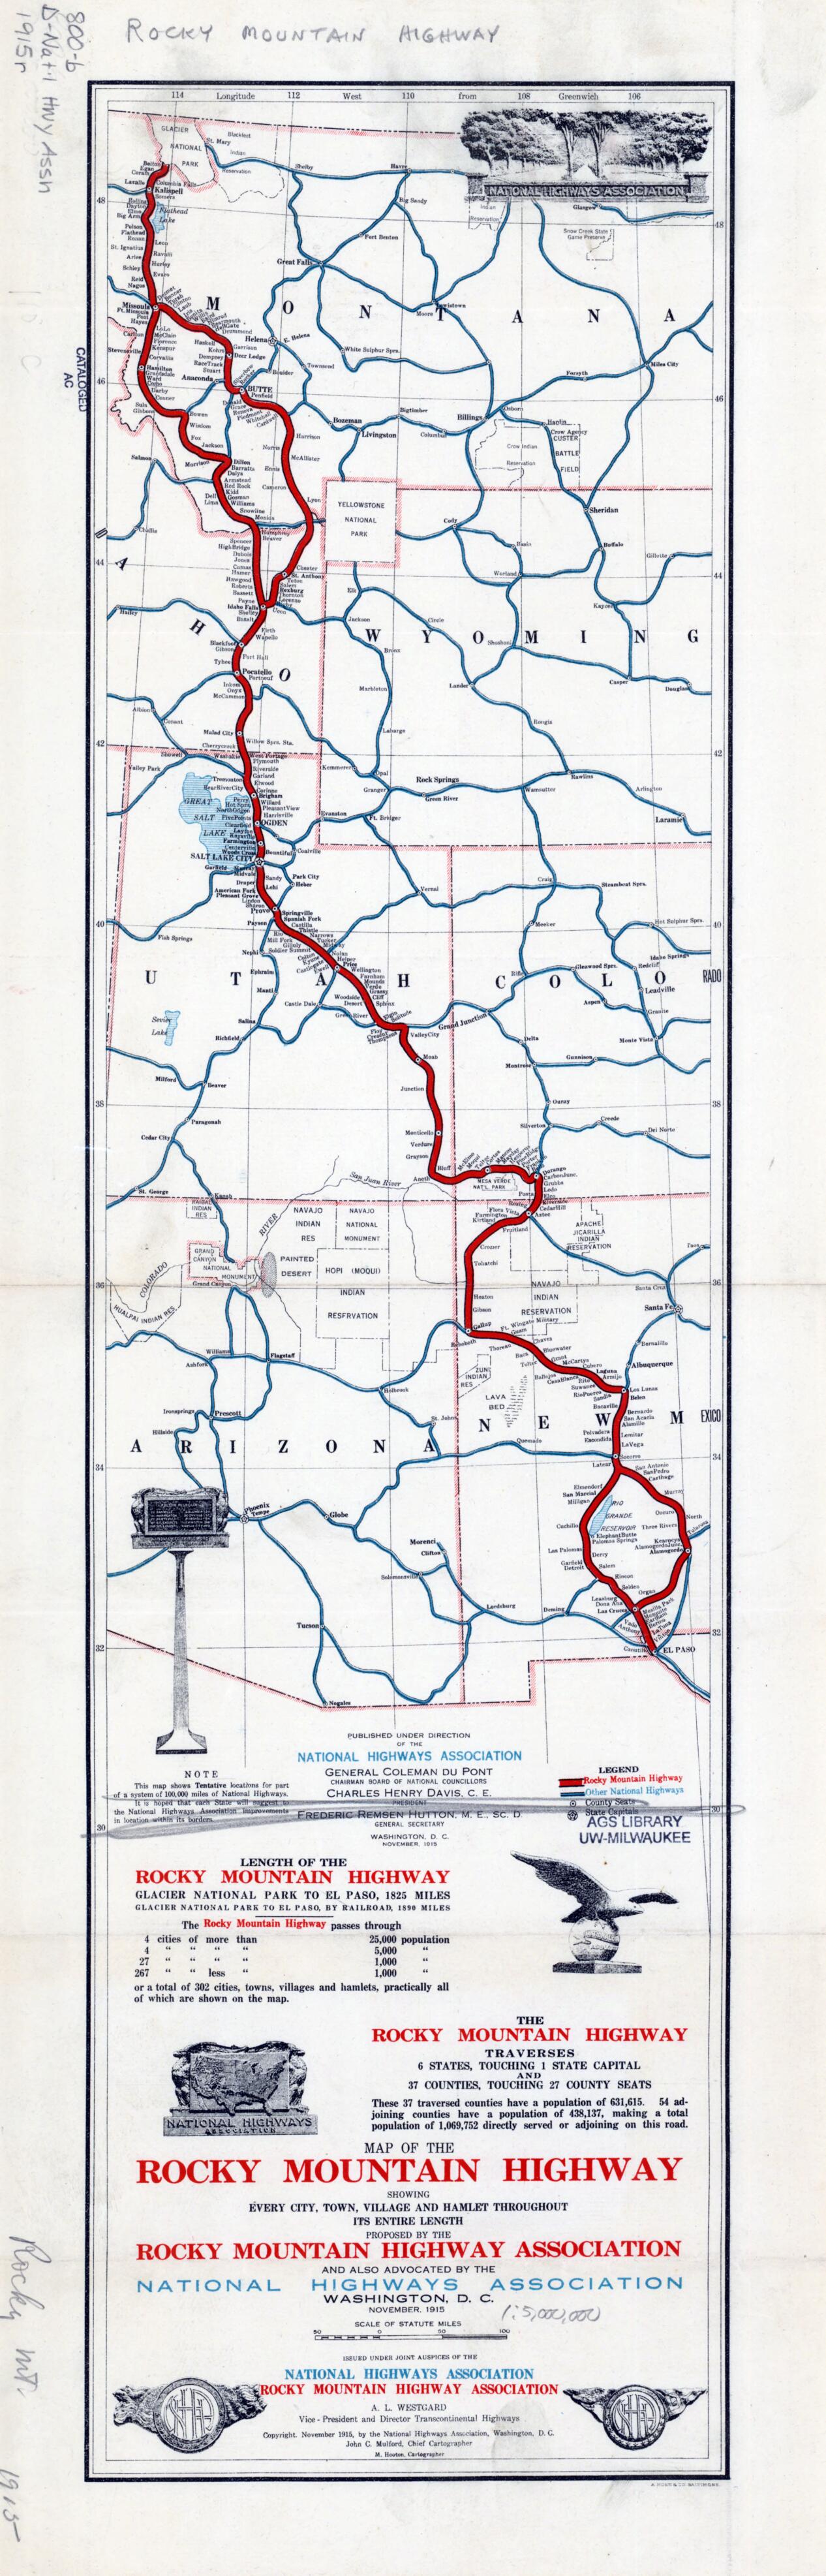 This old map of Map of the Rocky Mountain Highway. (Map of the Rocky Mountain Highway: Showing Every City, Town, Village and Hamlet Throughout Its Entire Length) from 1915 was created by M. Hooton, John C. Mulford,  National Highways Association,  Rocky 